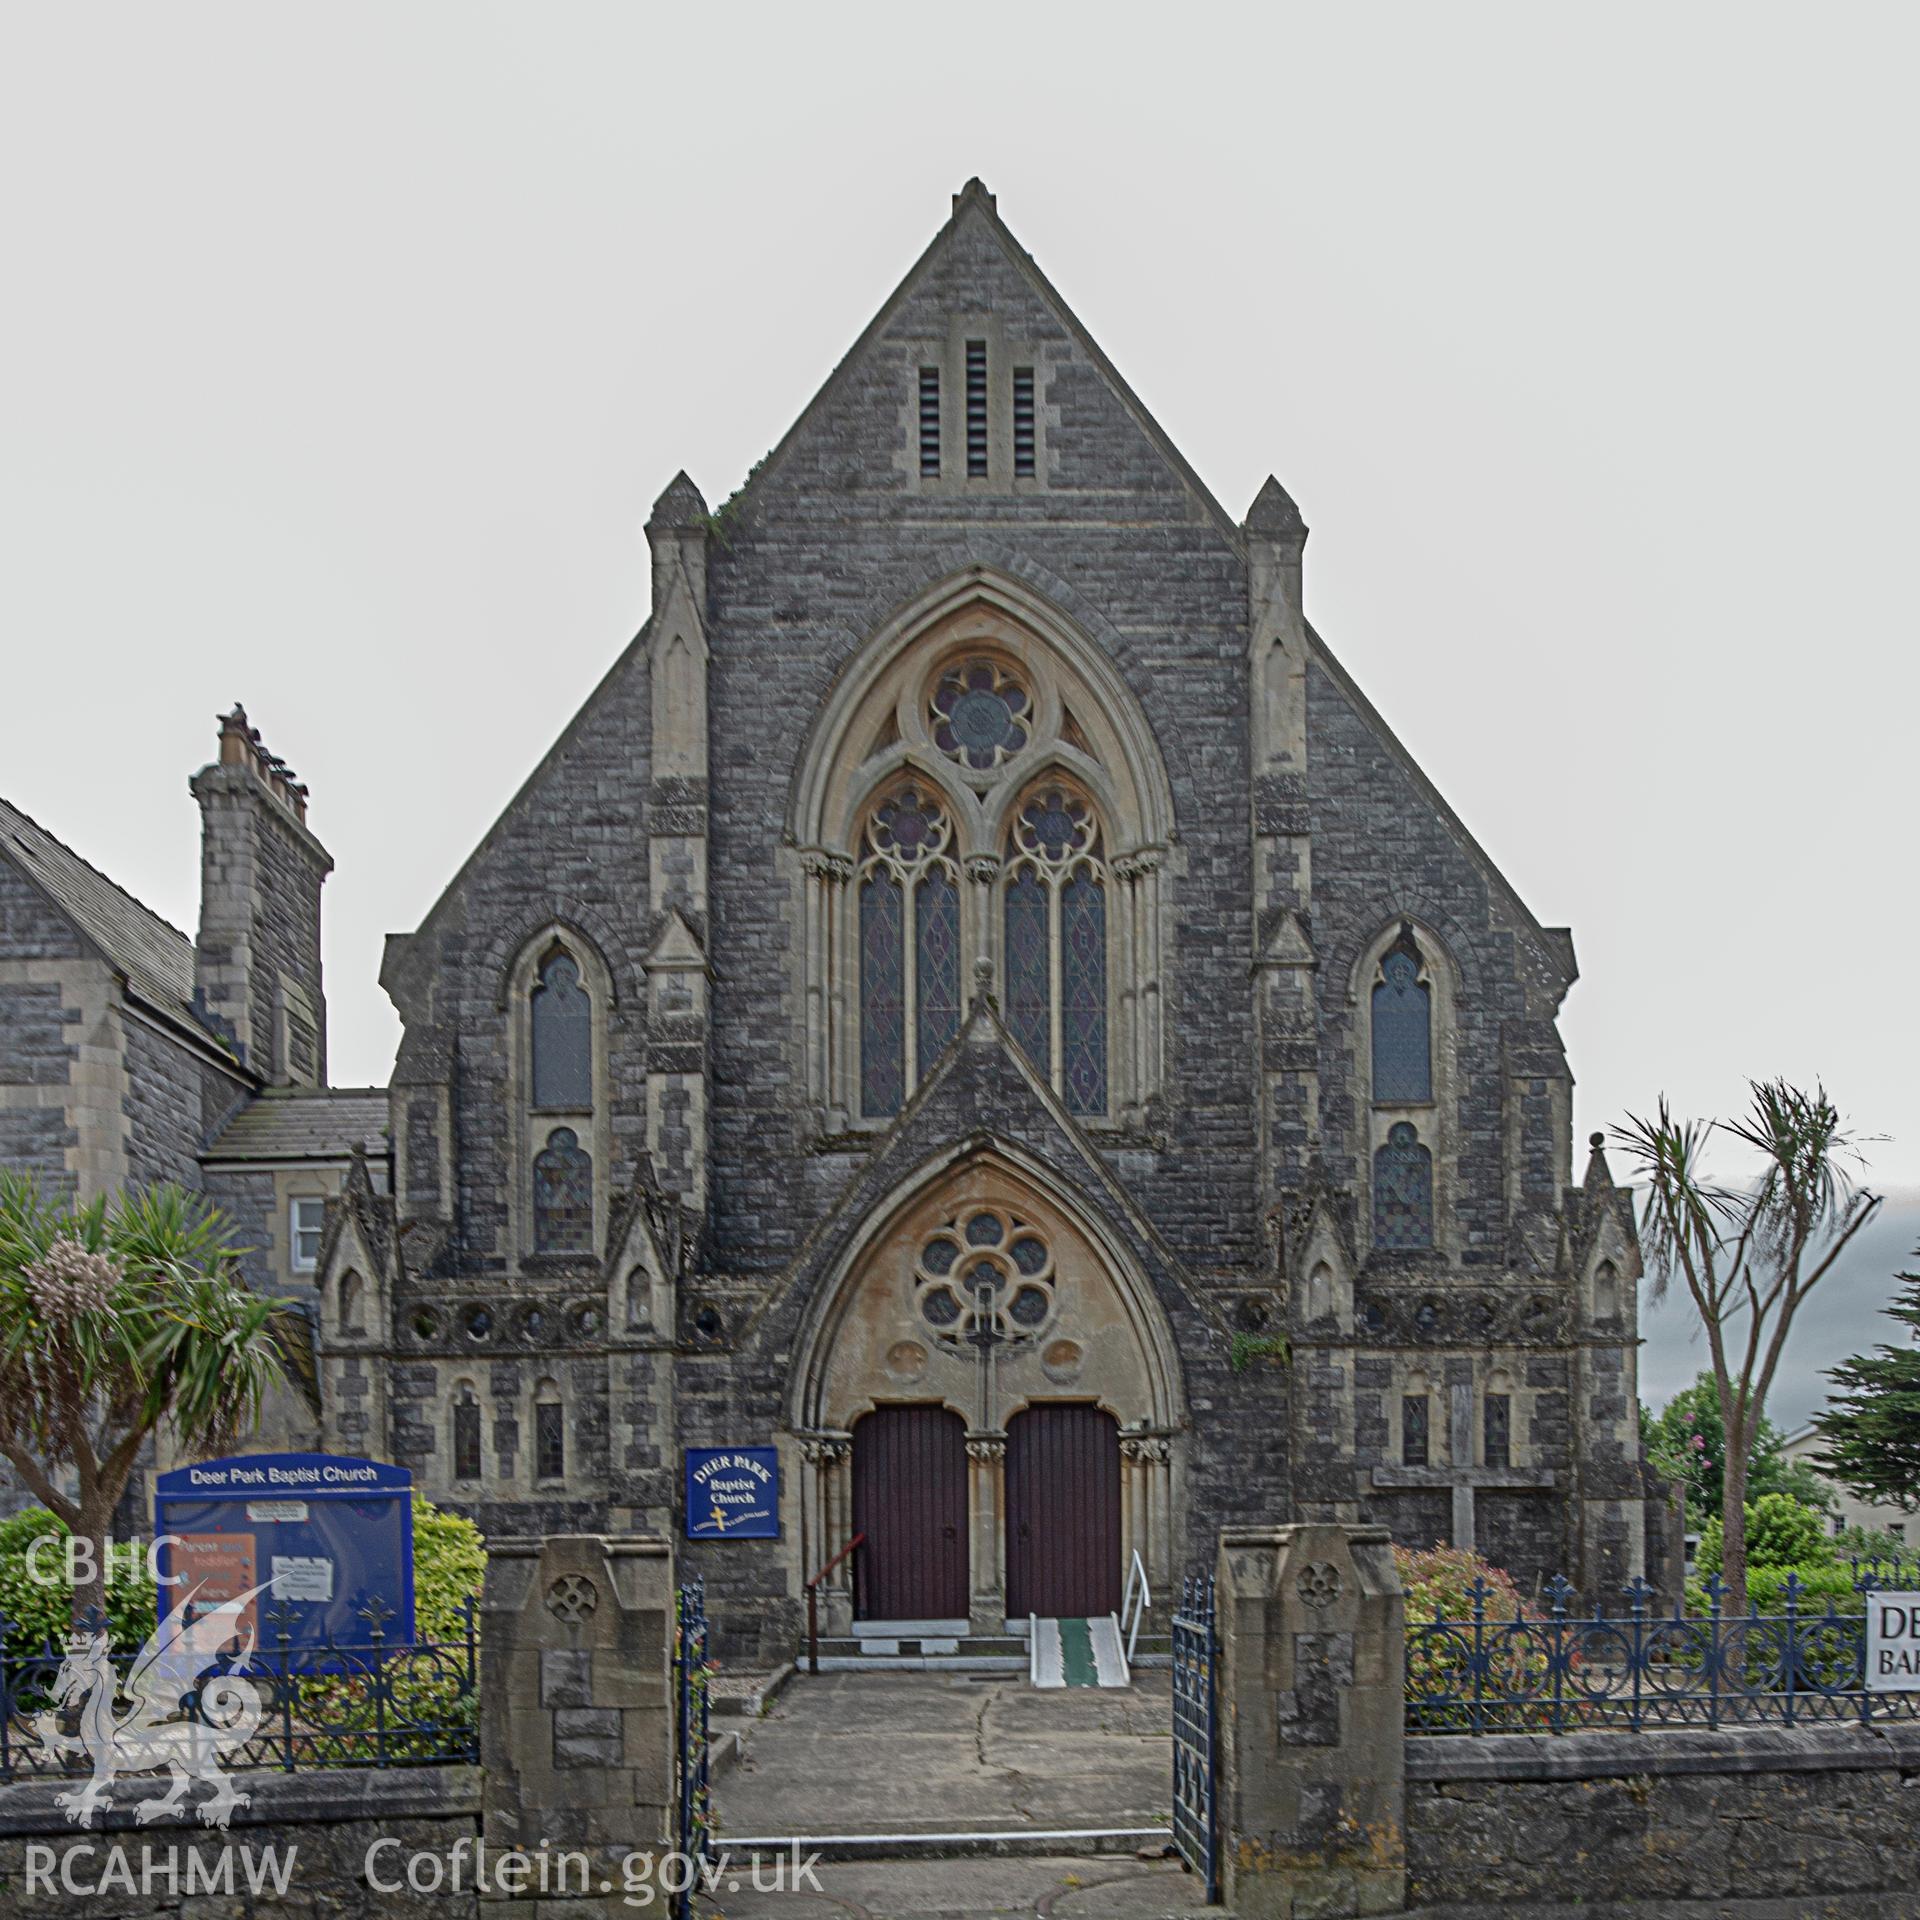 Colour photograph showing front elevation and entrance of Deer Park English Baptist Chapel, Greenhill Road, Tenby. Photographed by Richard Barrett on 20th June 2018.